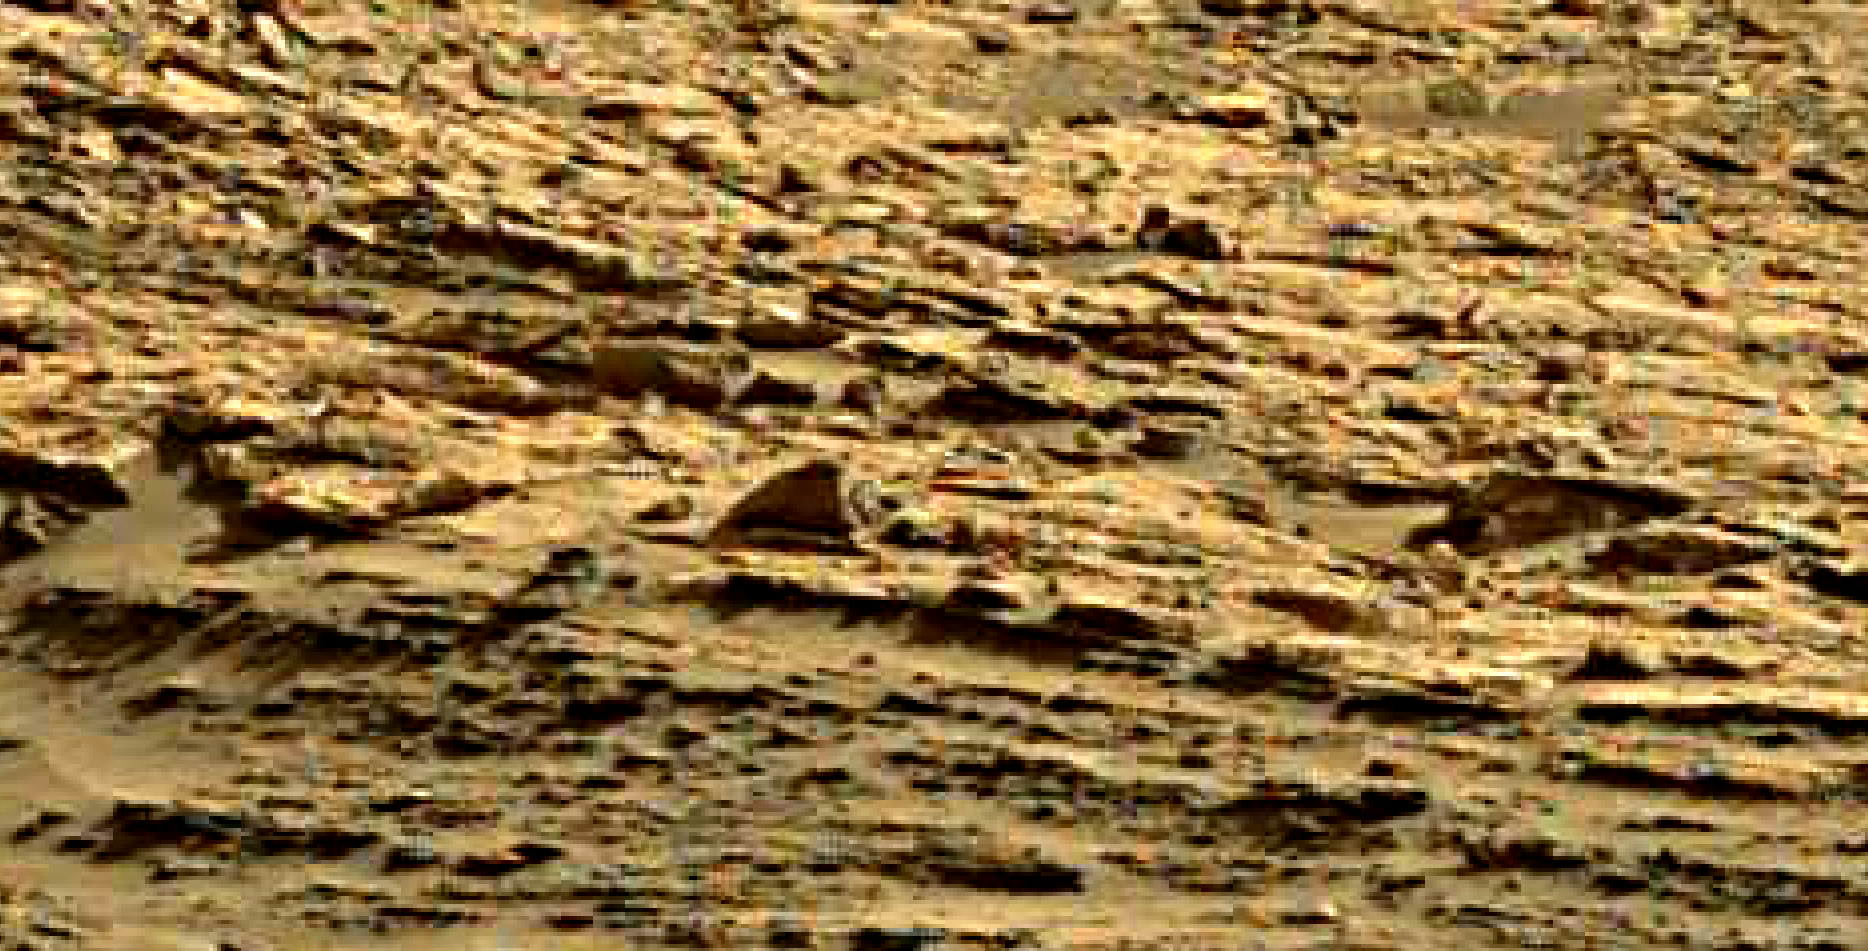 mars sol 1376 anomaly-artifacts 3 was life on mars